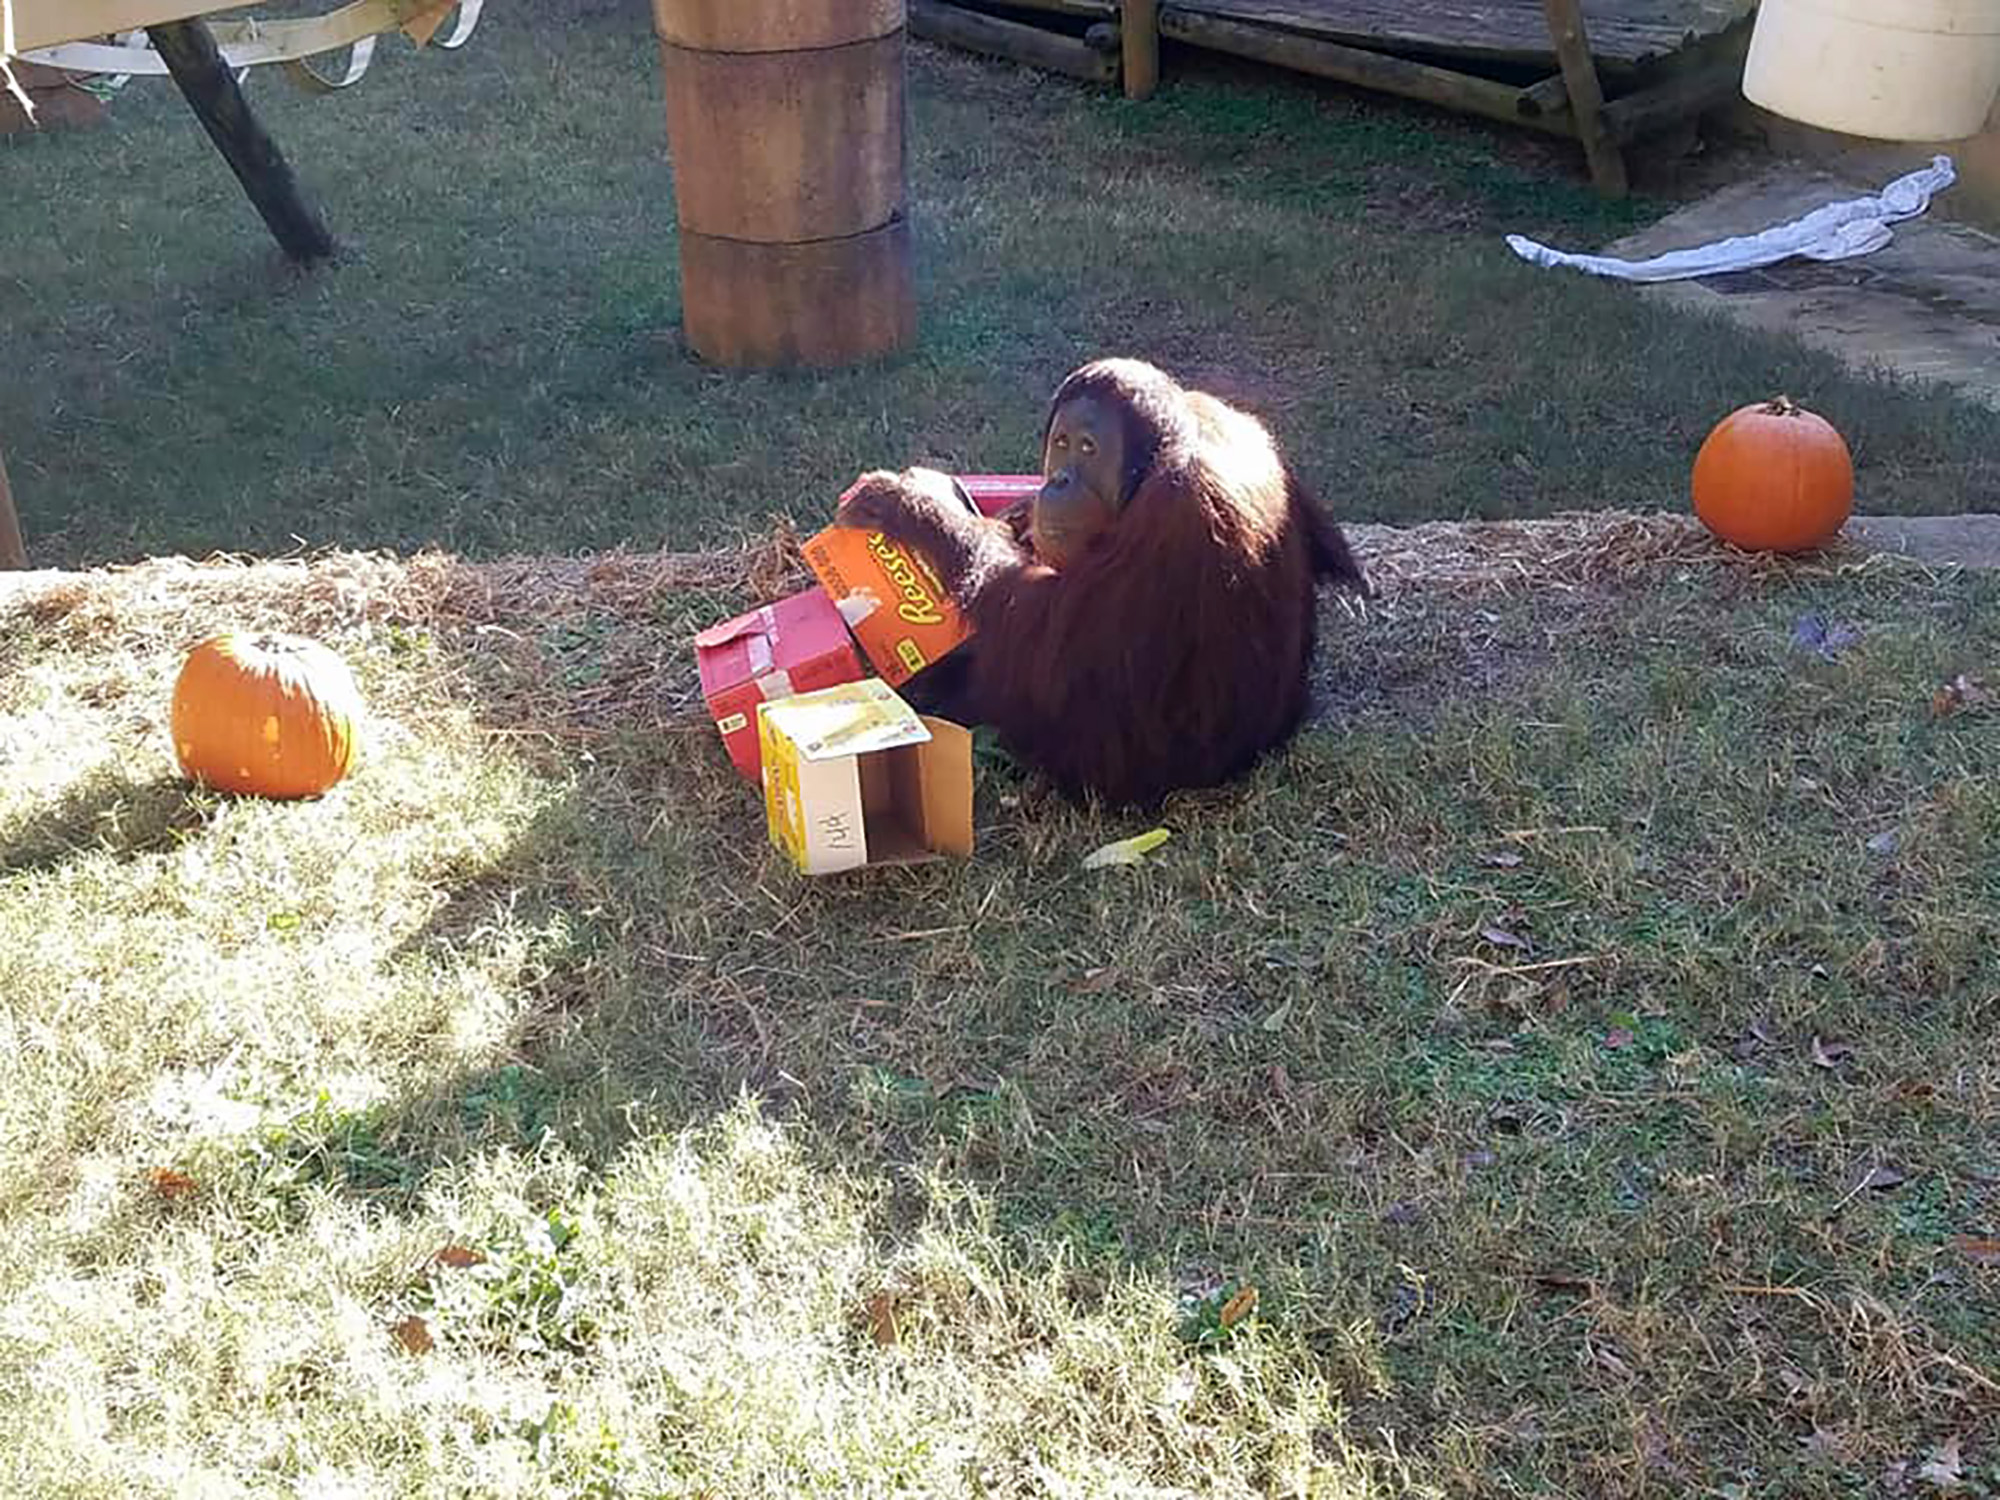 PHOTO: Kumar, the orangutan, plays with boxes at the Greenville Zoo in Greenville, S.C., Oct. 31, 2018. Kumar briefly escaped his enclosure on Jan. 22, 2018 but returned quickly.